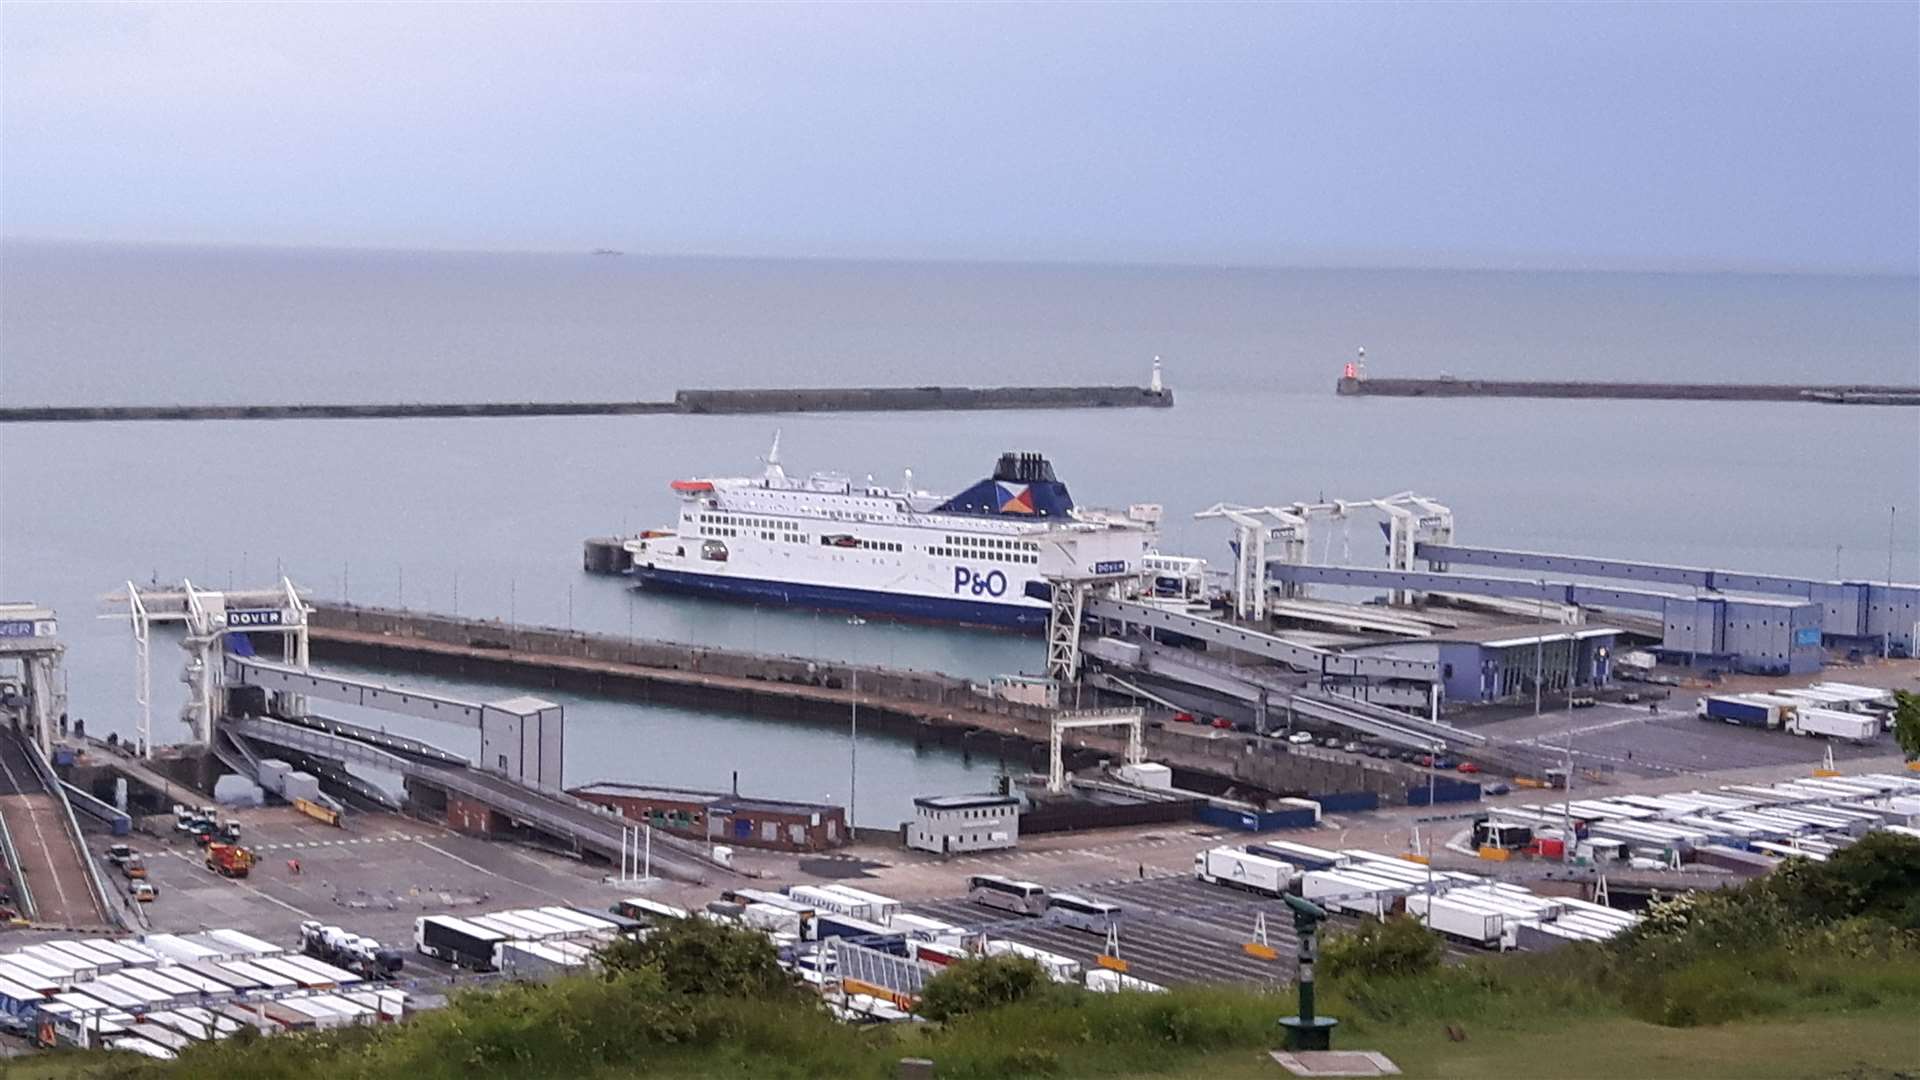 P&O warns of delays on its Dover sailings. Library image